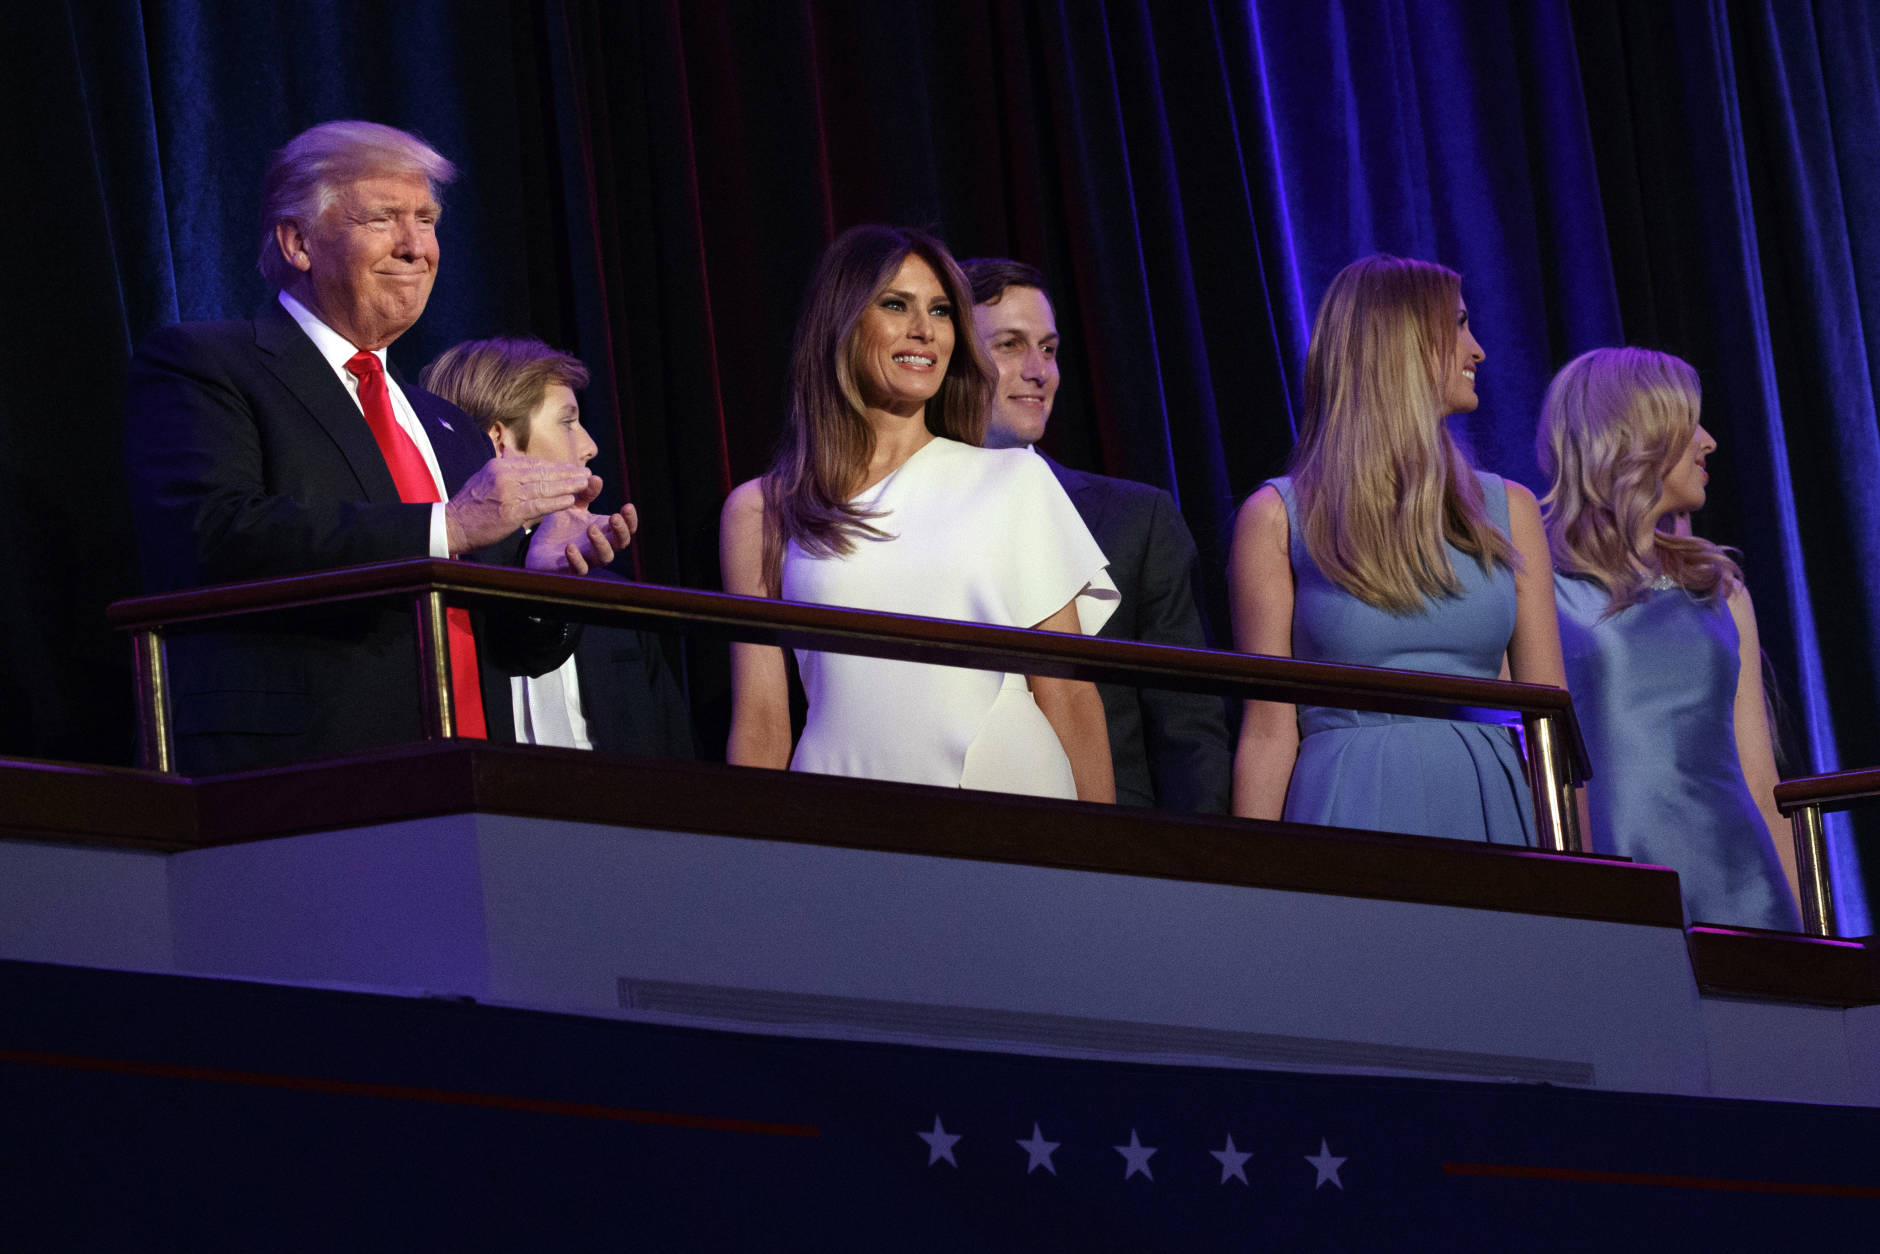 President-elect Donald Trump, left, arrives to speak at an election night rally, Wednesday, Nov. 9, 2016, in New York. From left, Trump, his son Barron, wife Melania, Jared Kushner, Ivanka Trump, and Tiffany Trump. (AP Photo/ Evan Vucci)